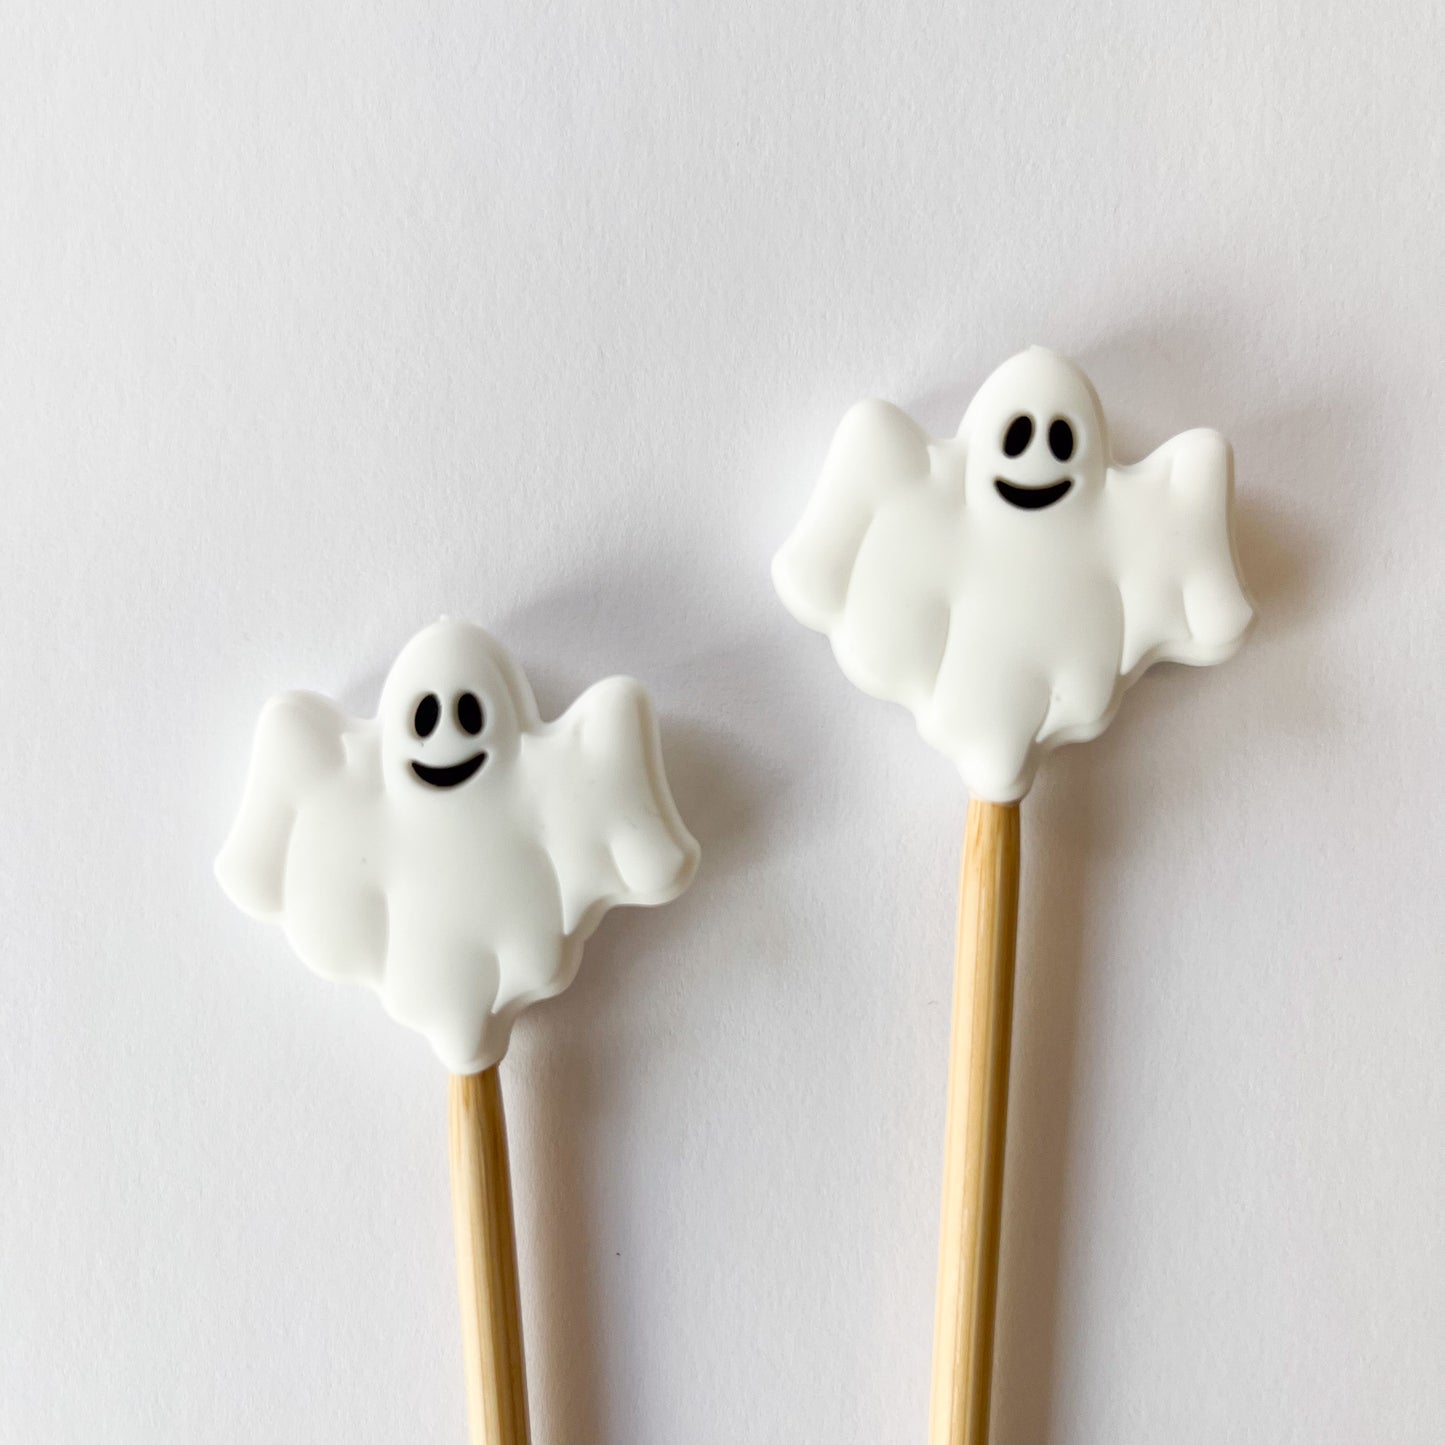 Ghost | Stitch Stoppers By Toil & Trouble